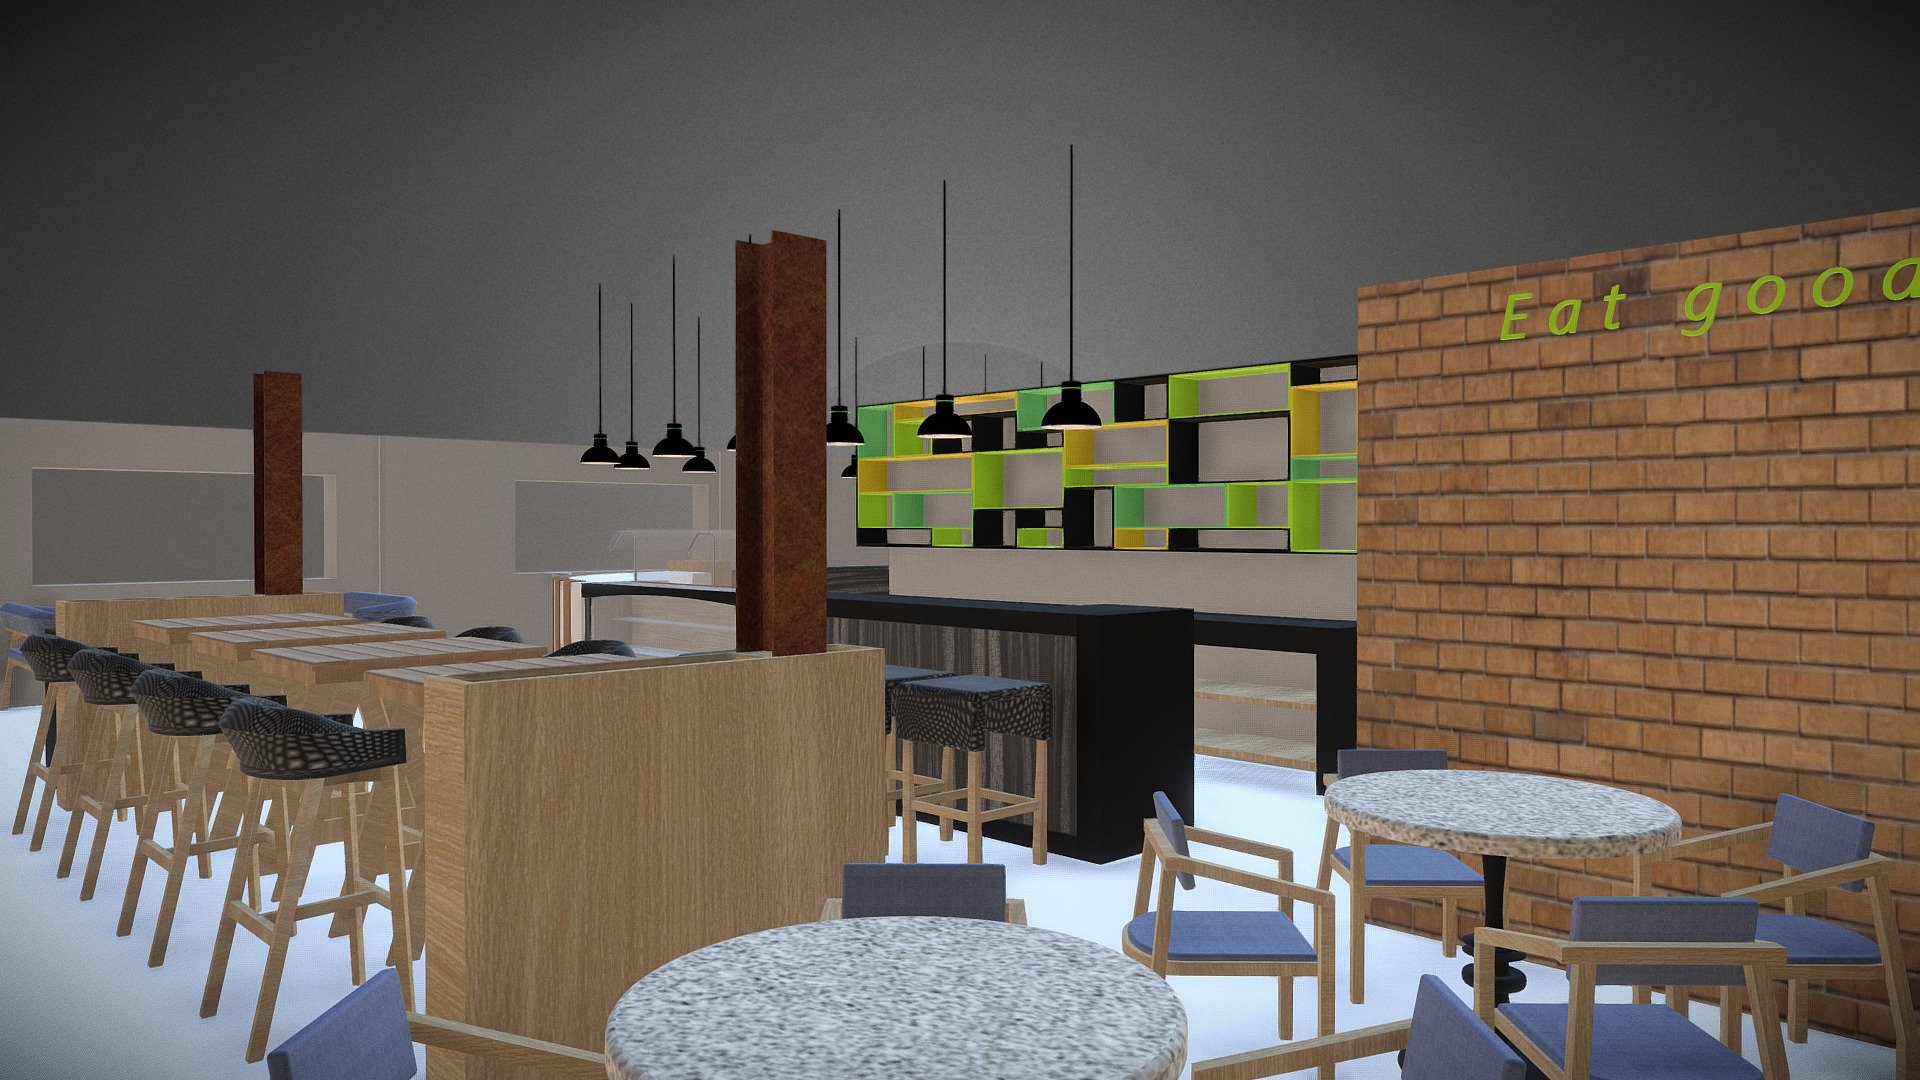 Small and very colourful Bar-Restaurant concept for private client. 

More Info: http://www.hollington-architects.co.uk/
Profile: www.jdelcampo.com - Bar-Restaurant - 3D model by JdelCampo (@jesusdelcampo) 3d model